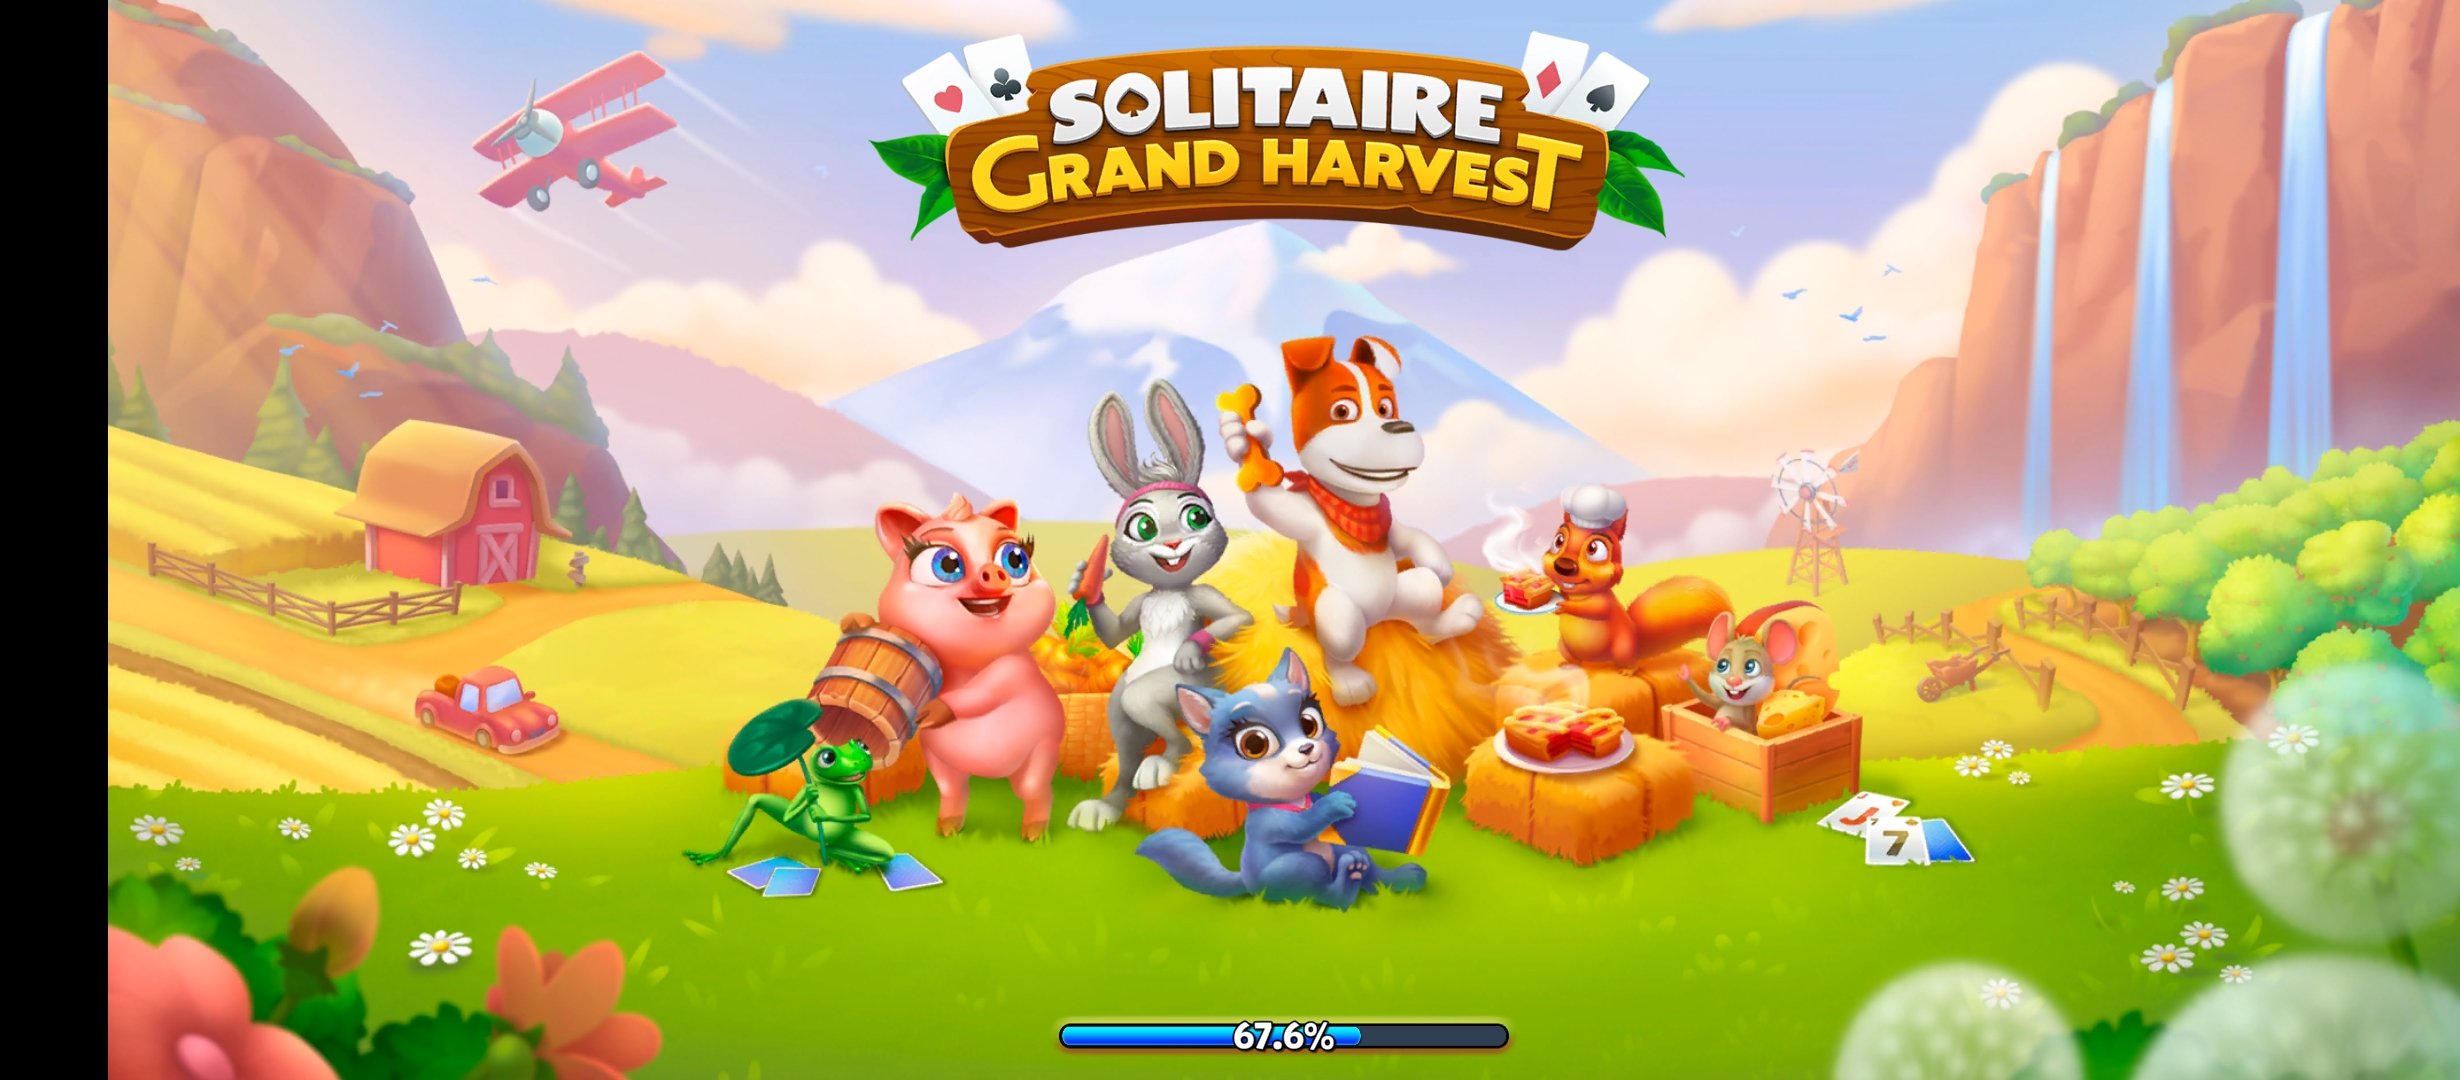 Solitaire Grand Harvest - Free Coins (Updated Daily)